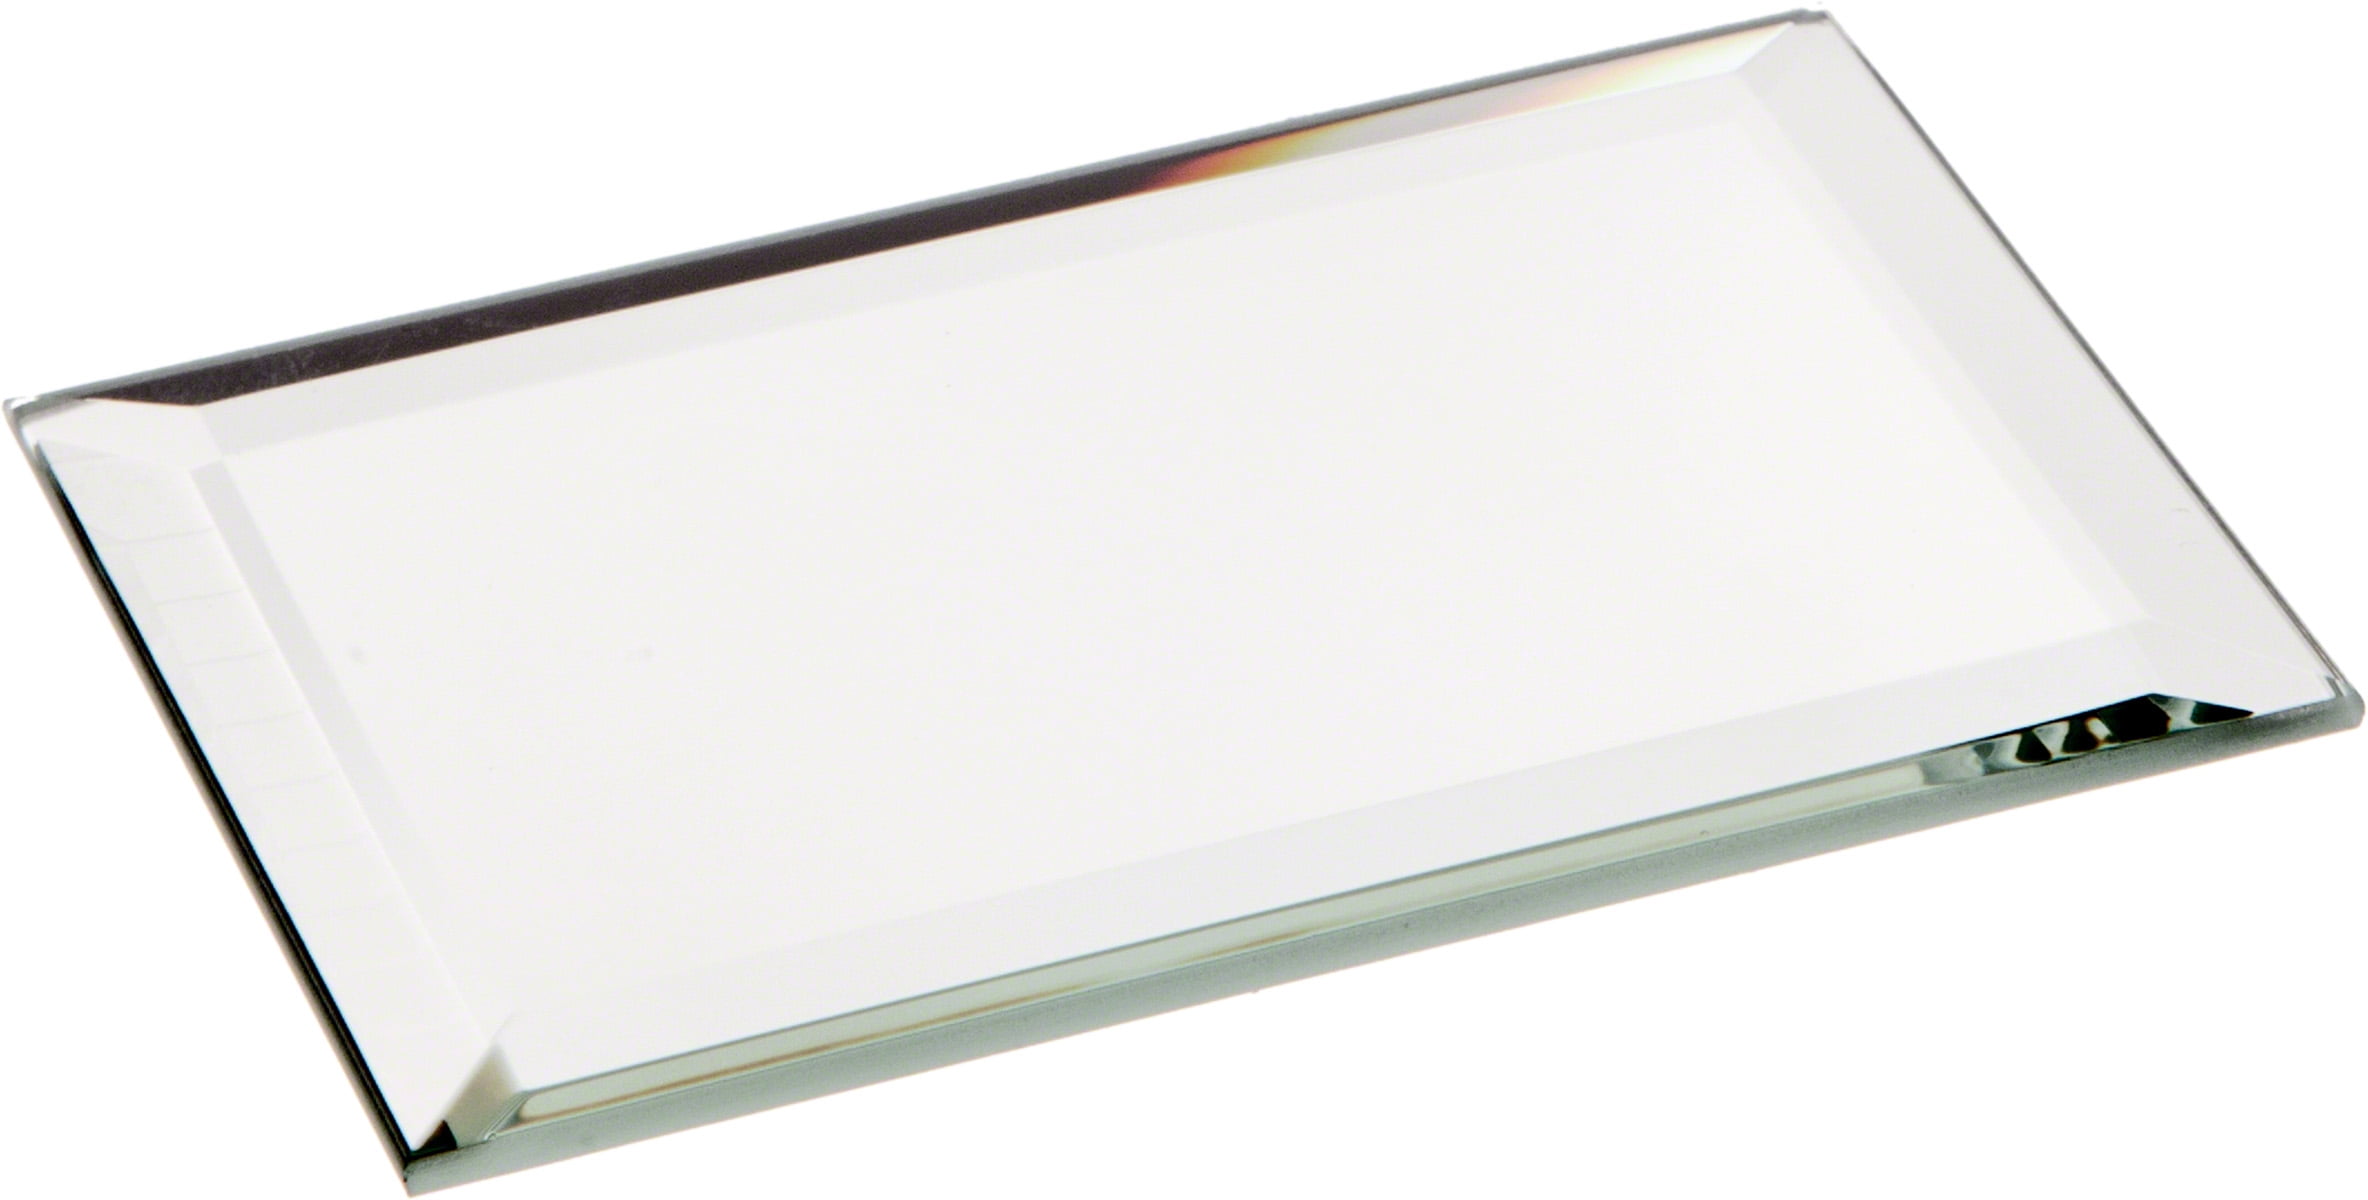 Plymor Oval 3mm Beveled Glass Mirror 3 inch x 5 inch Pack of 3 